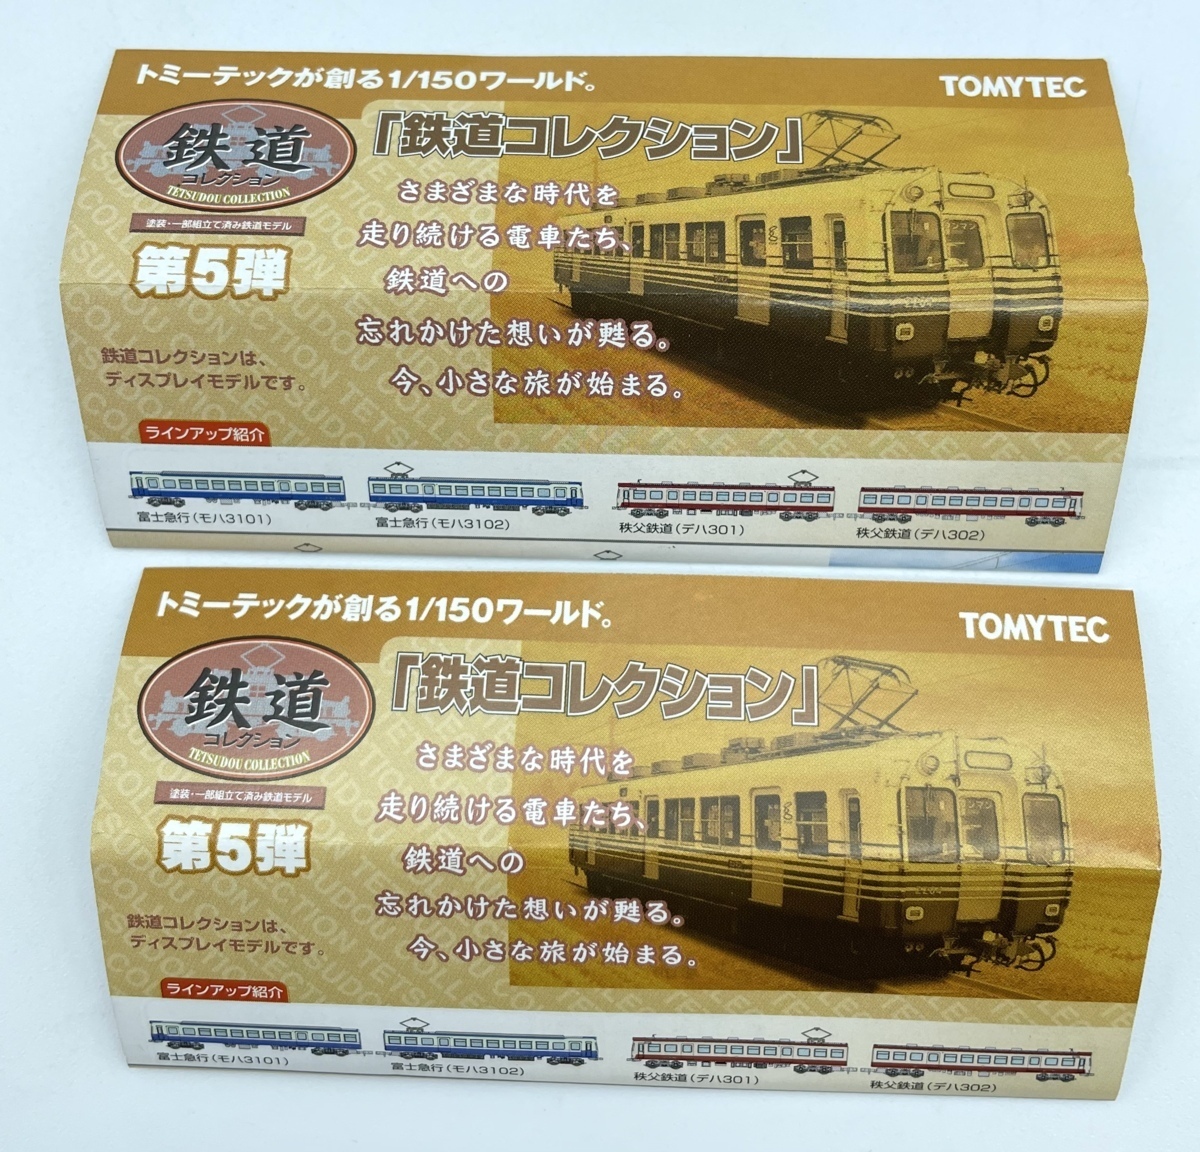 ☆2D 111　N_ST　鉄道コレクション　鉄コレ　TOMYTEC　トミーテック　第5弾　秩父電鉄　デハ301　デハ302　2両セット　注意有　#5_画像8